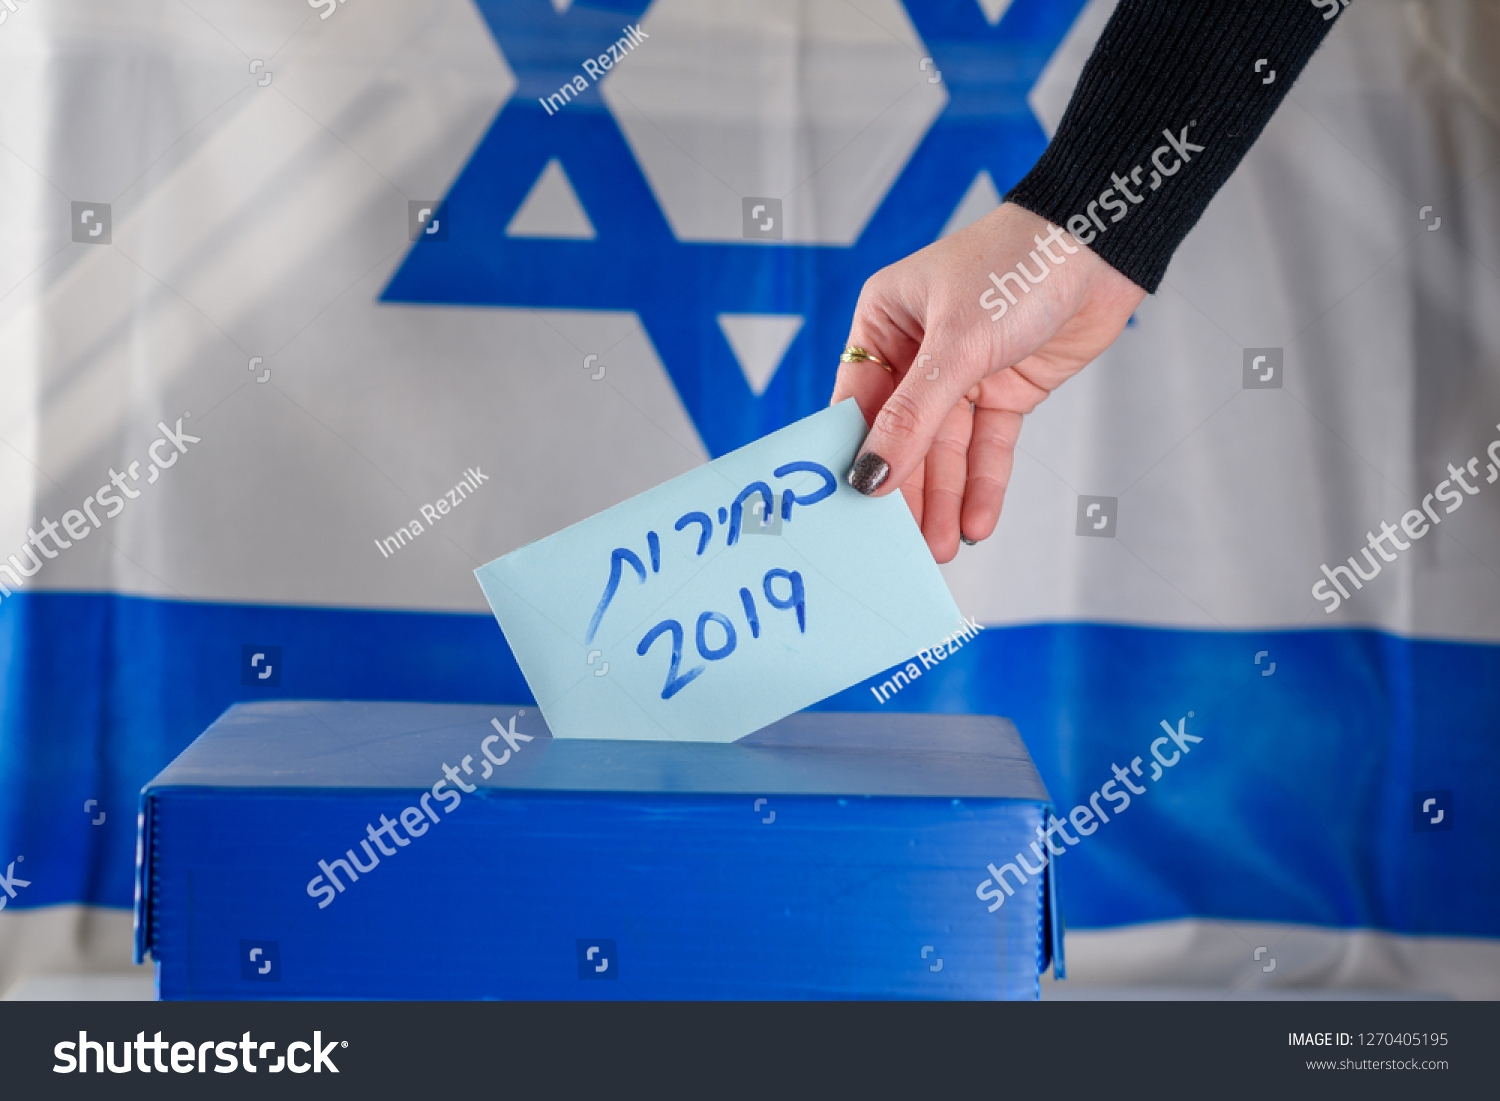 Election in Israel - voting at the ballot box. The hand of woman putting her vote in the ballot box. Israeli Flag on background. Hebrew text Elections 2019. #1270405195